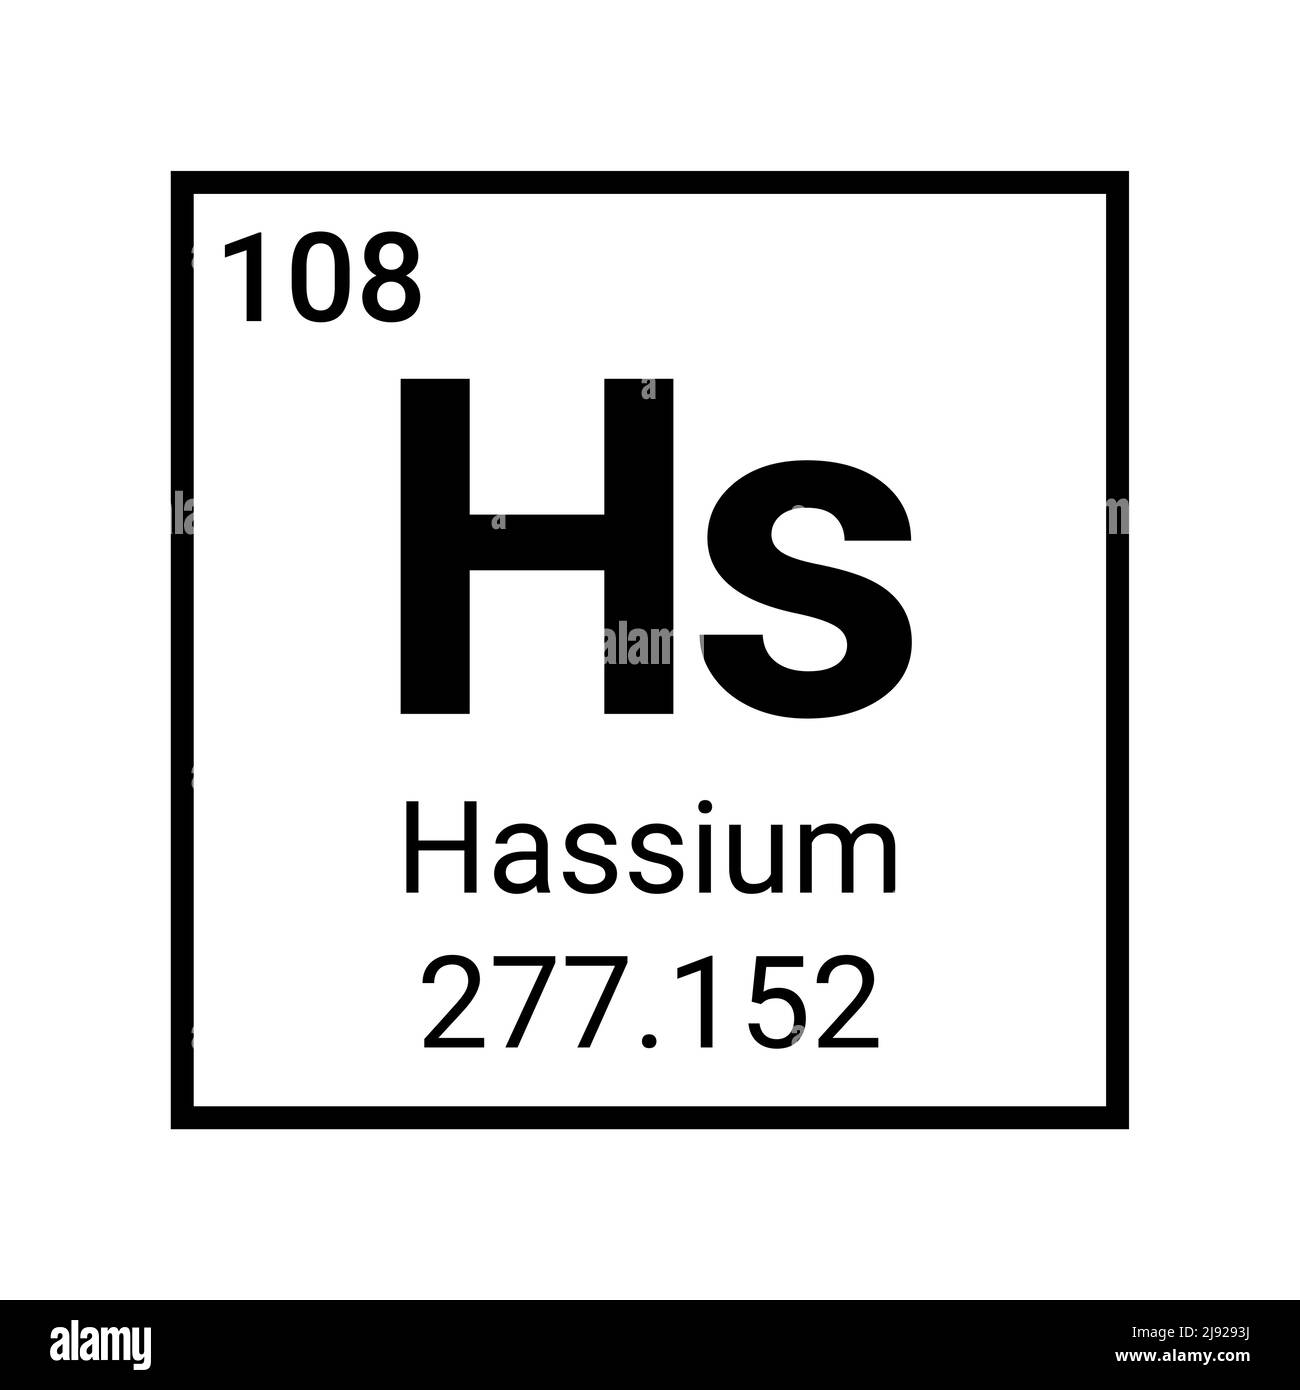 Hassium periodic table chemical element. Mendeleev table hassium atom sign Stock Vector